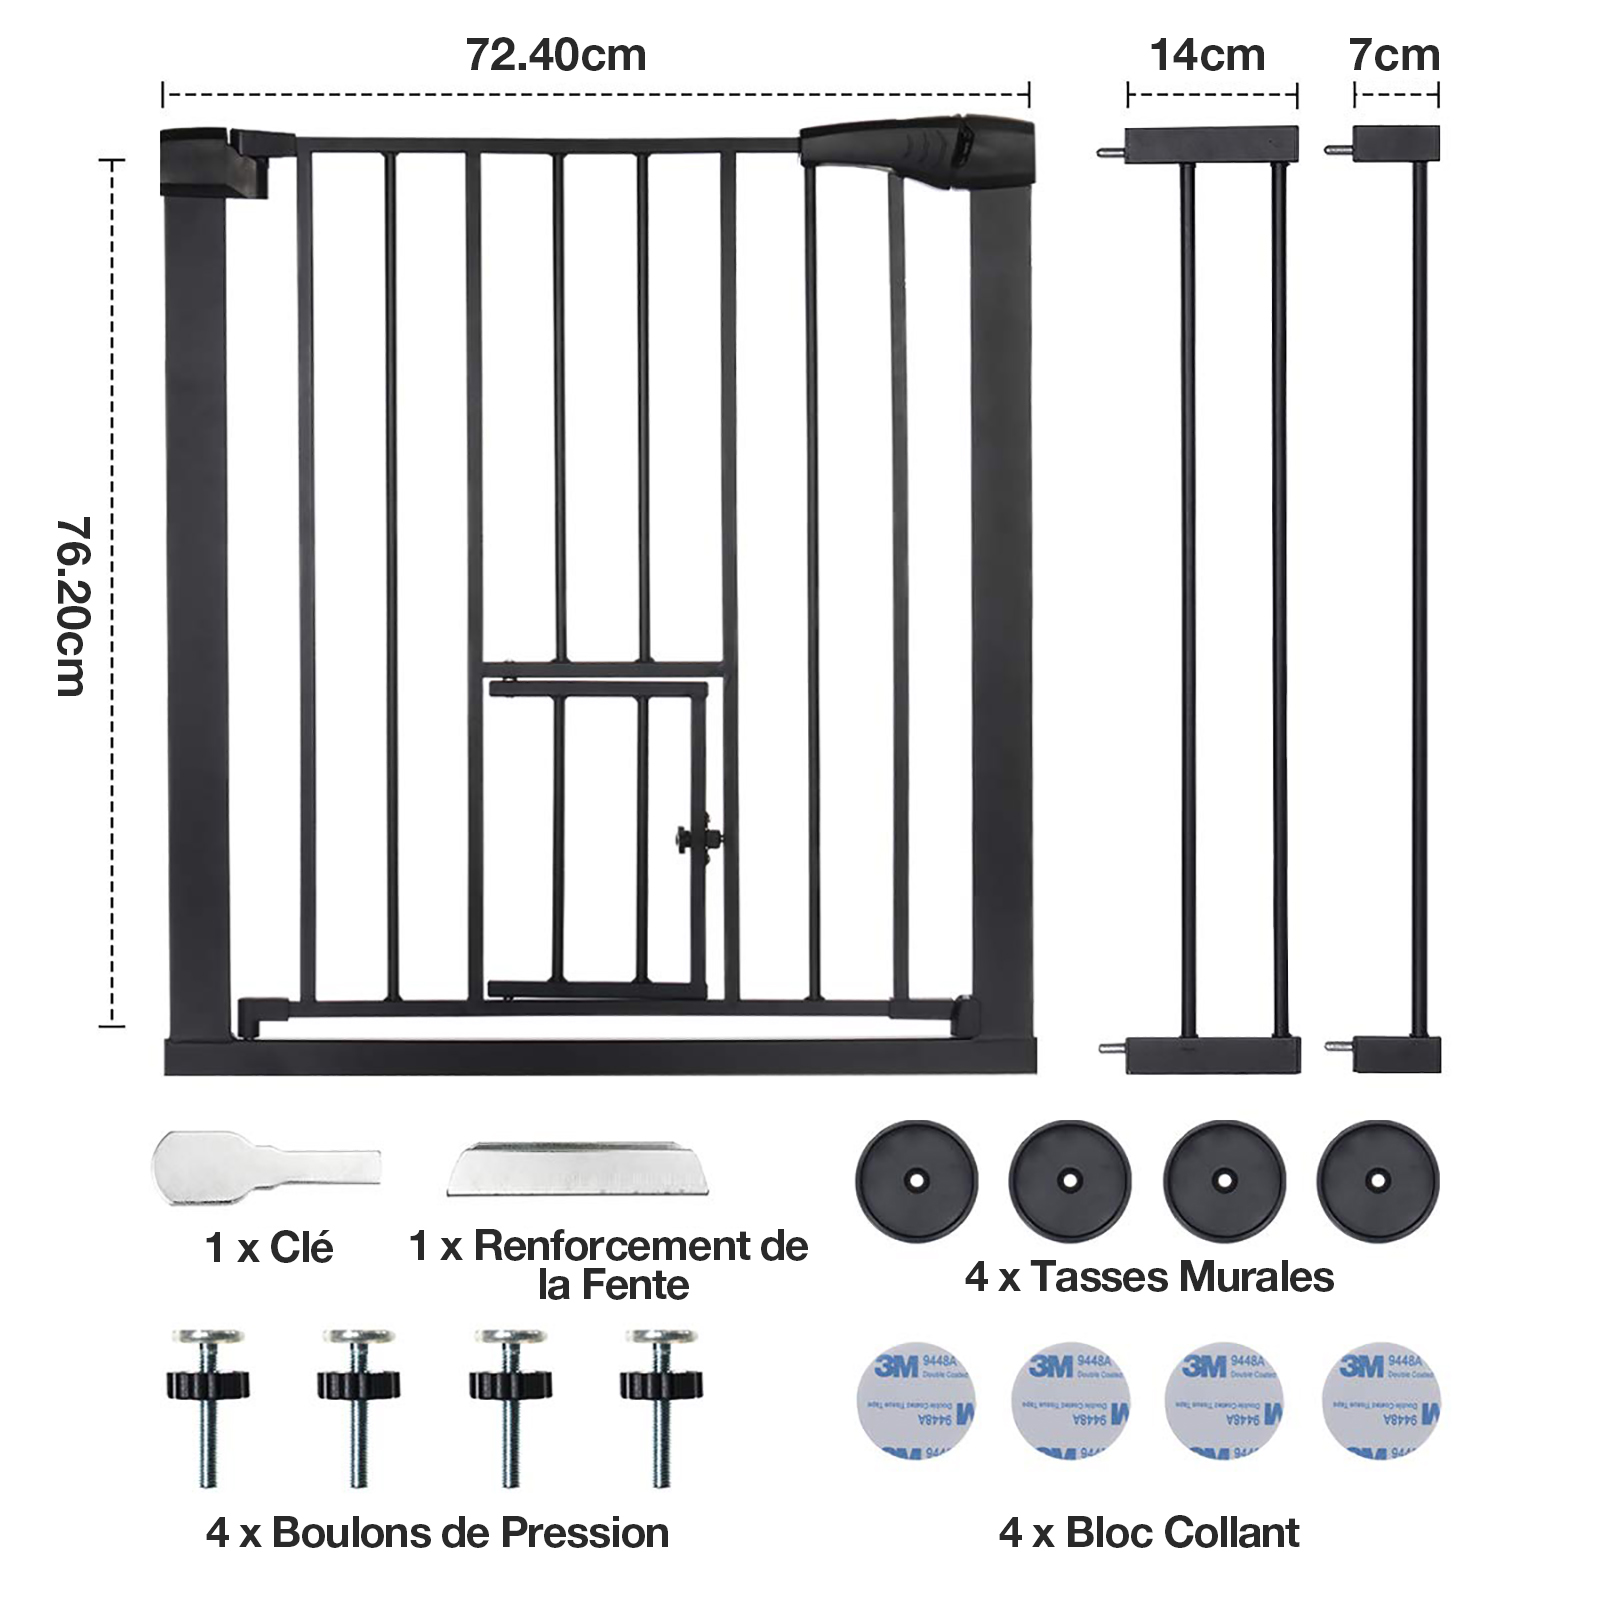 Comomy-Extra-Wide-Pet-Gate-for-Dog-Cat-Animal-Baby-Gate-Fence-Pens-with-Swing-Door-Kids-Play-Gate-30-1900433-4